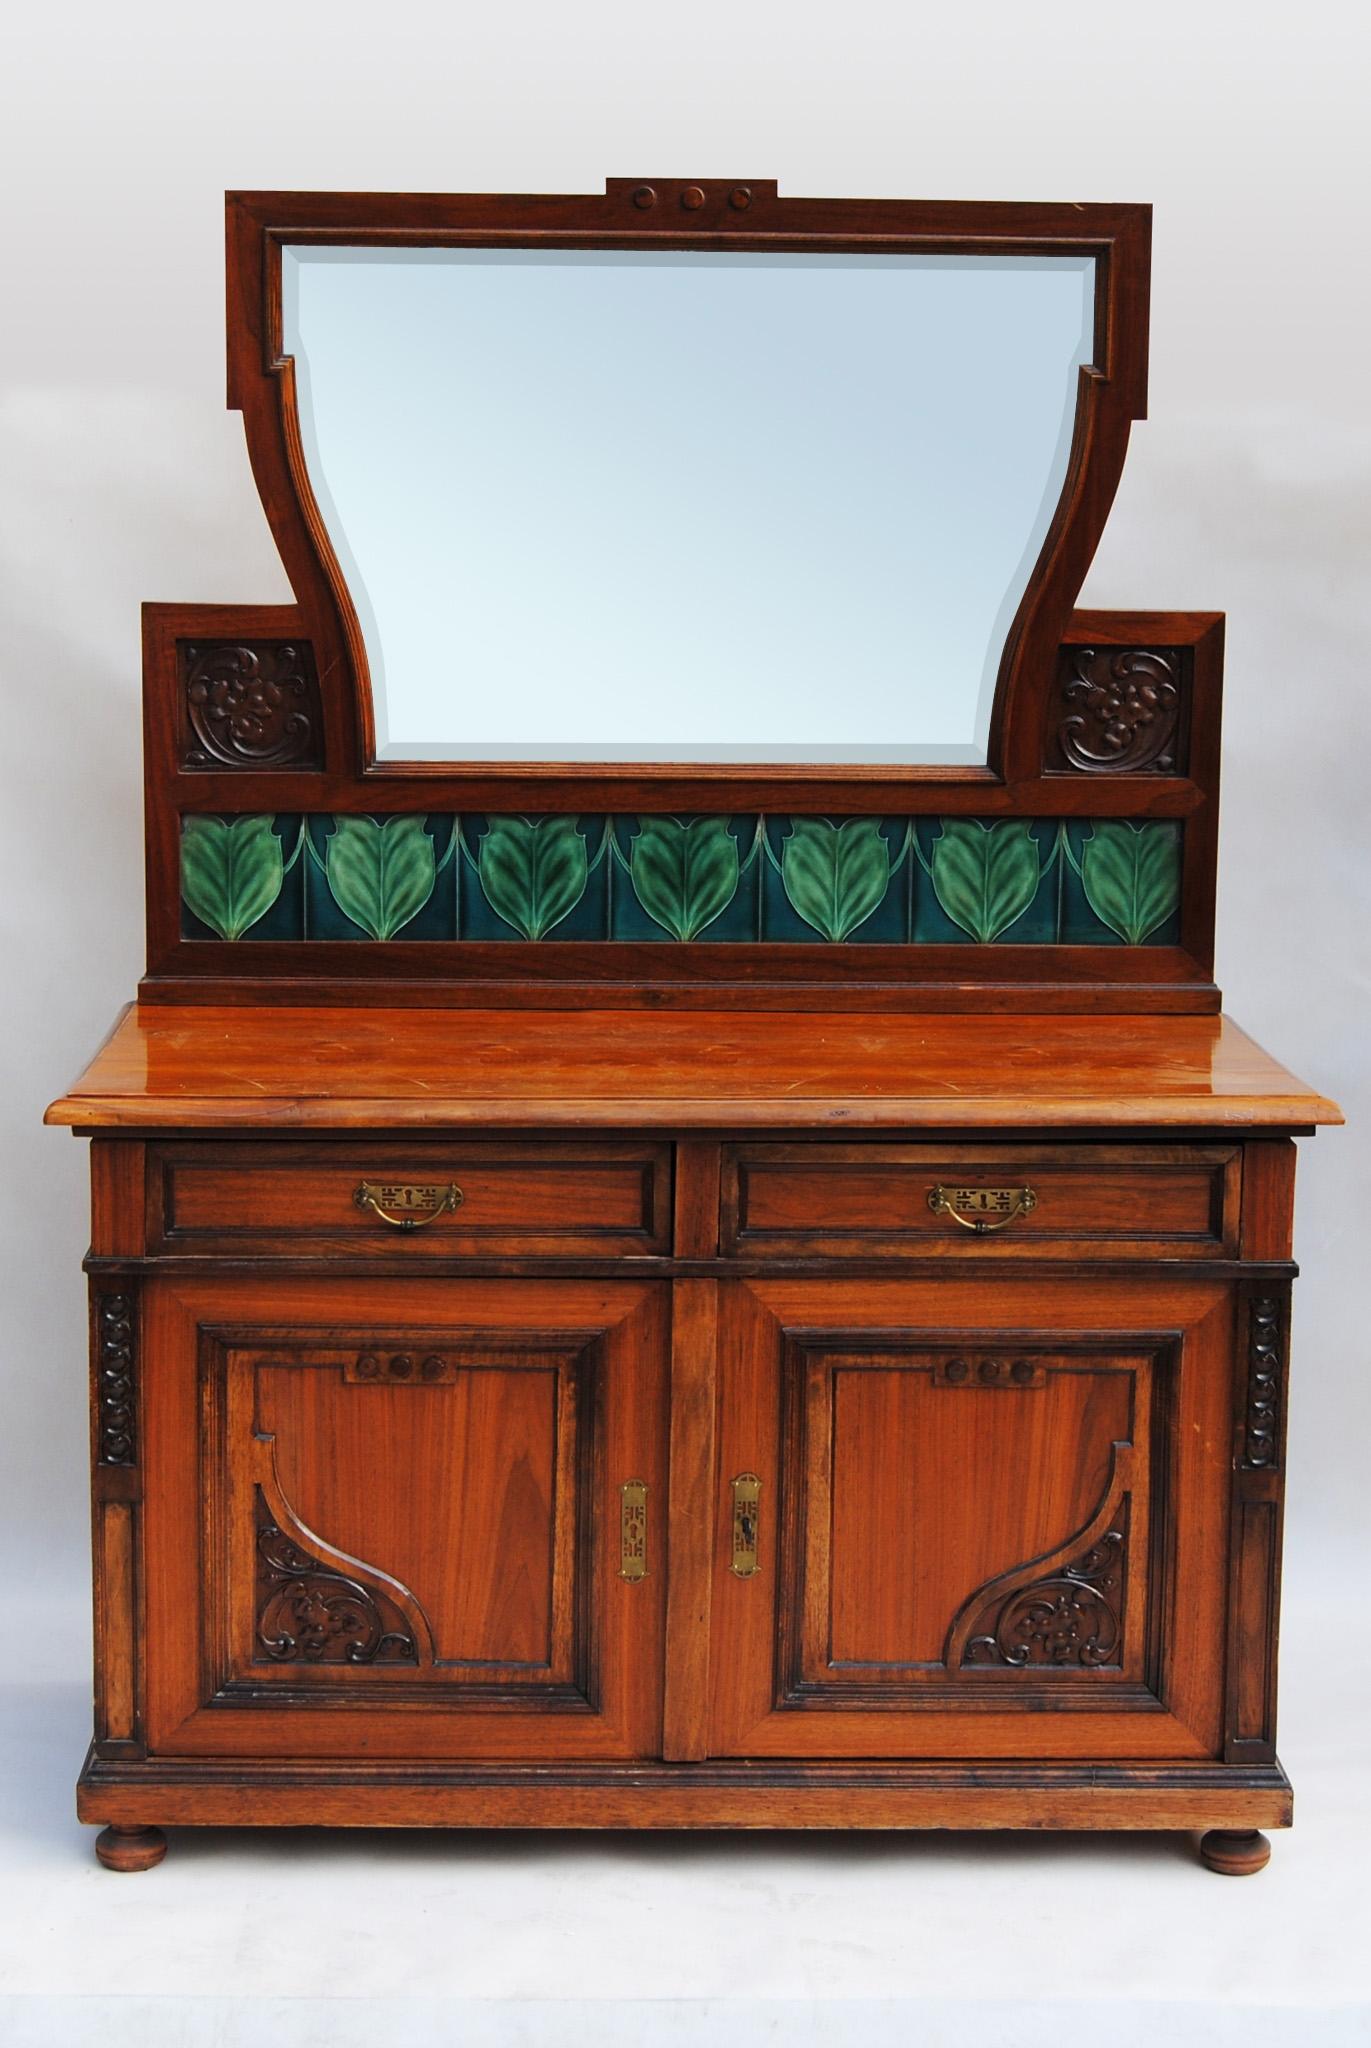 Art Nouveau dressing table.
Source: Czechia (Czechoslovakia)
Material: Cherry-tree
Period: 1910-1919
Completely restored.